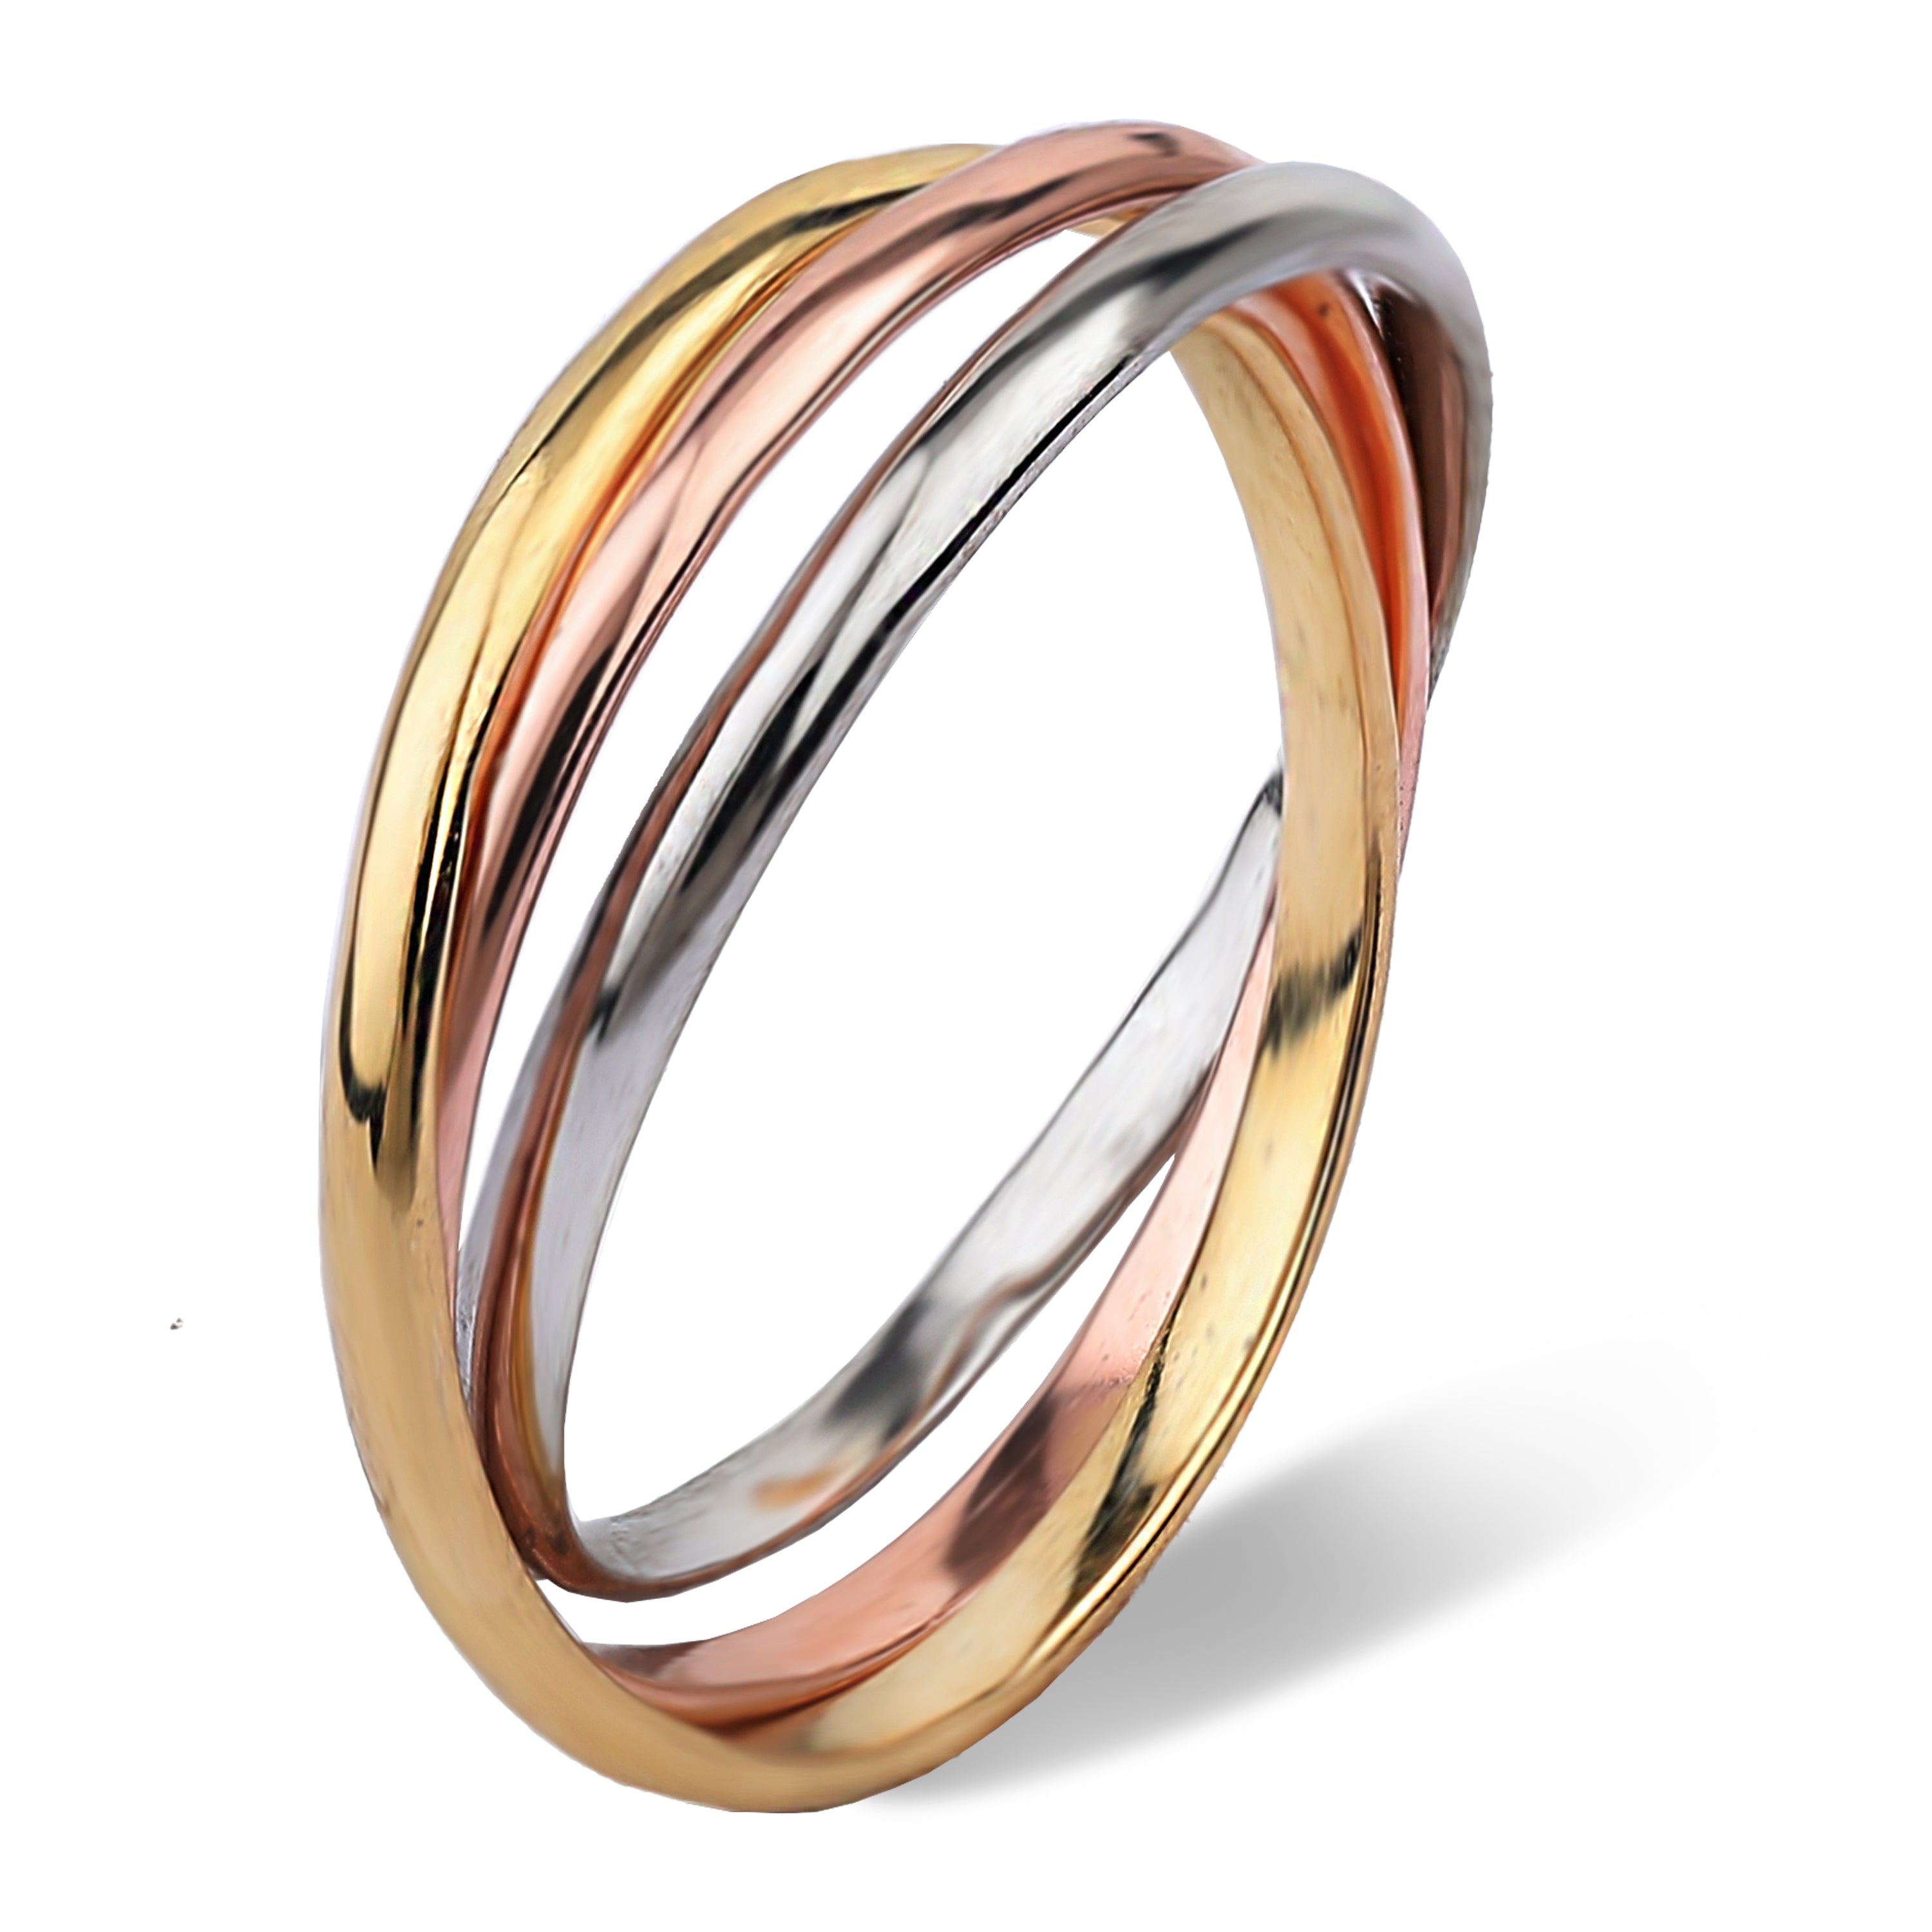 Tricolor rolling ring